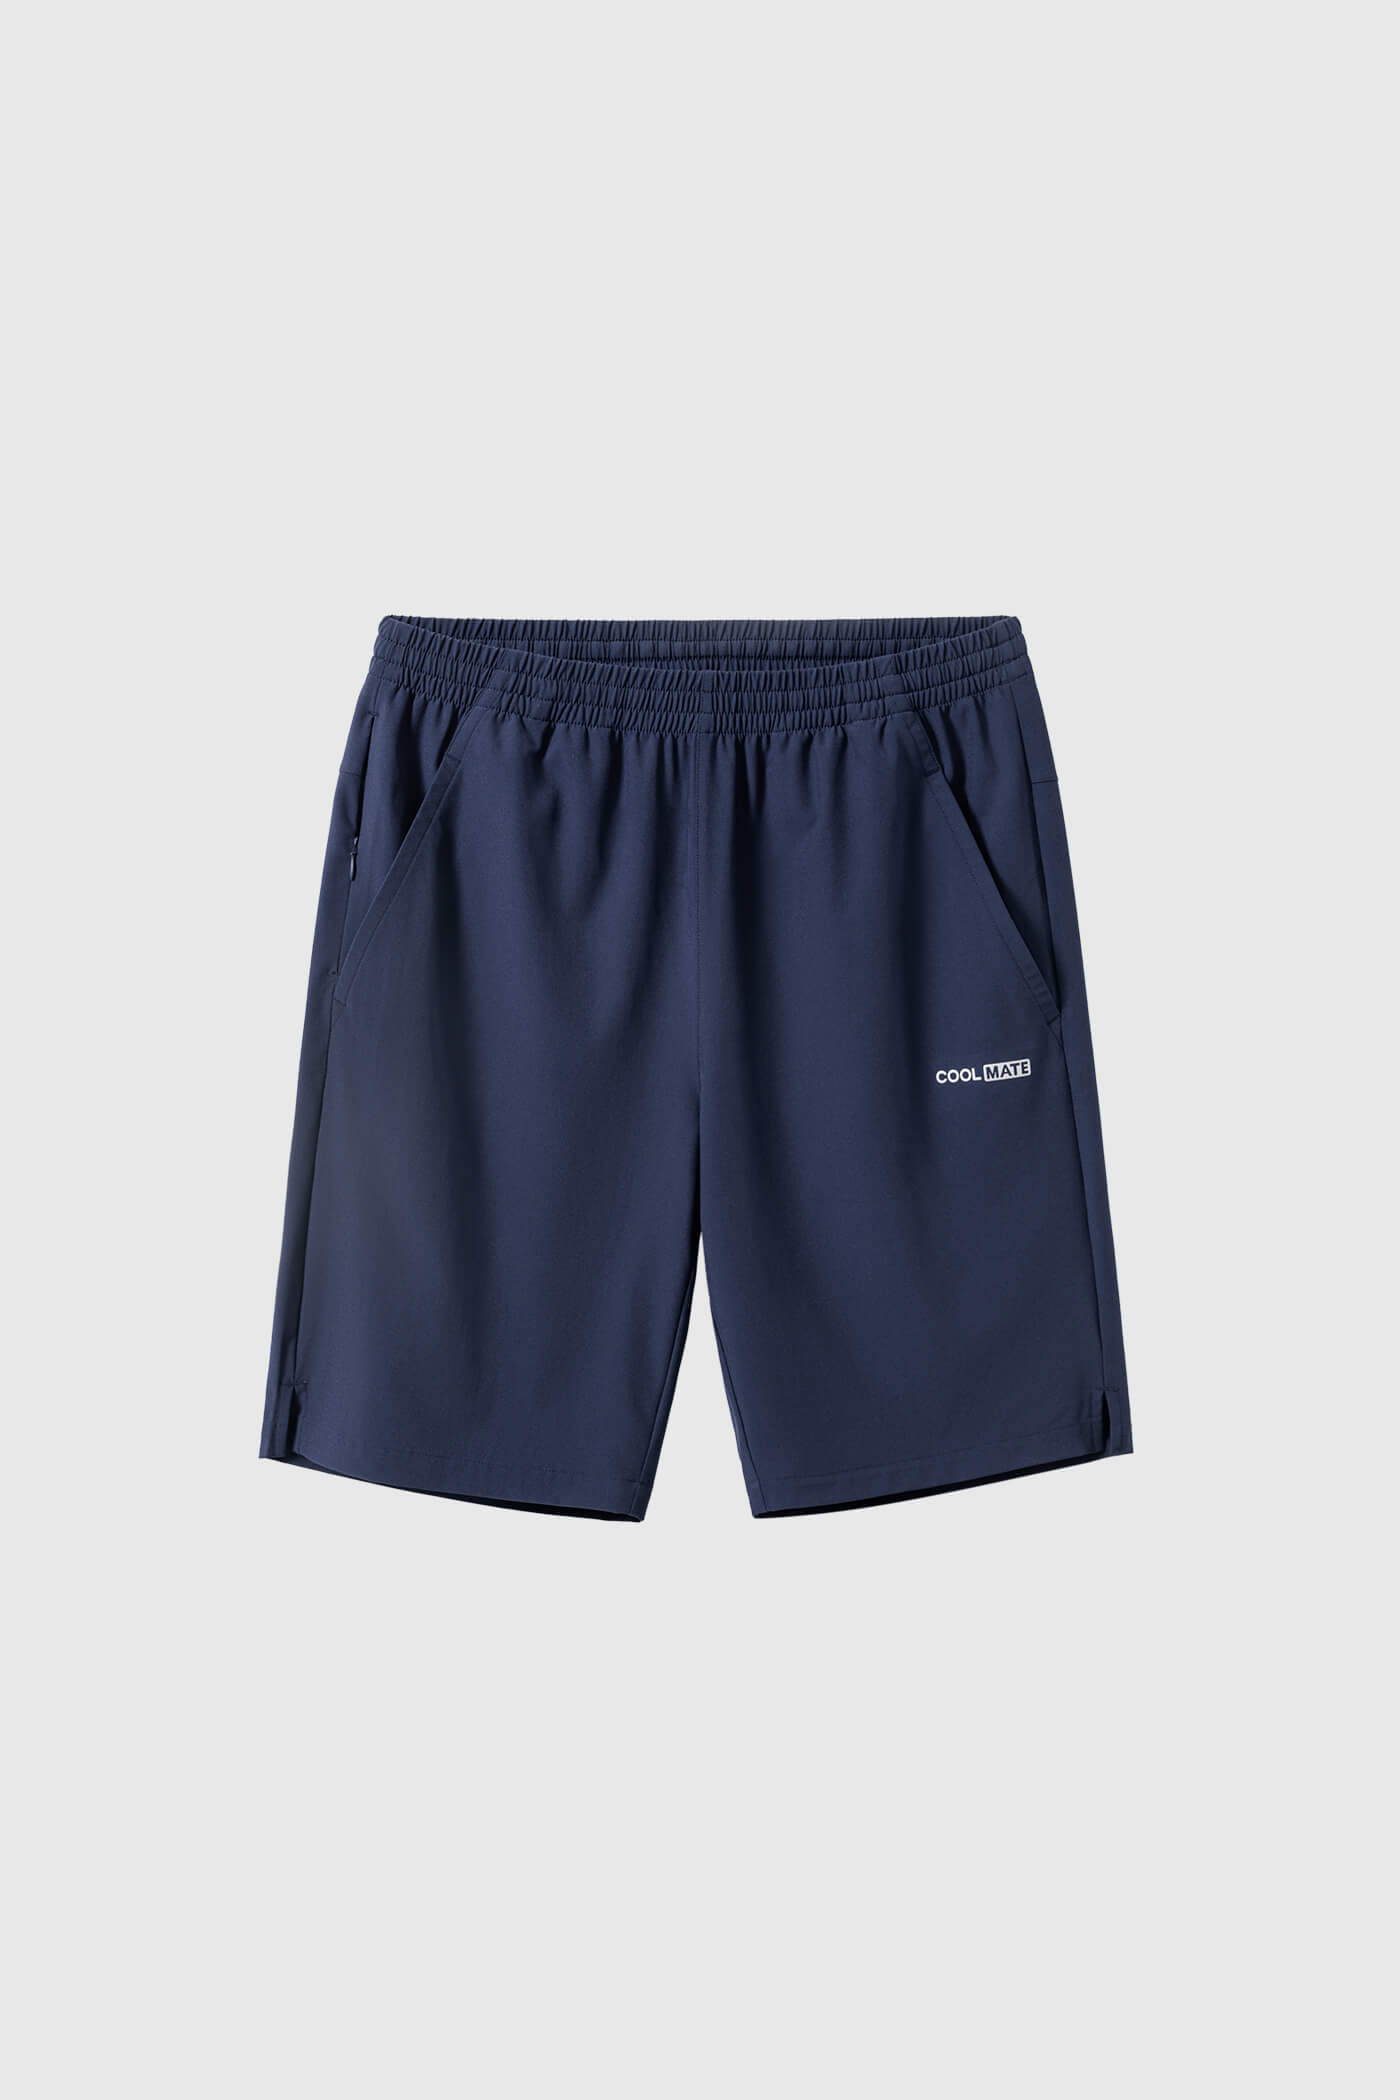 Shorts thể thao 9"  1